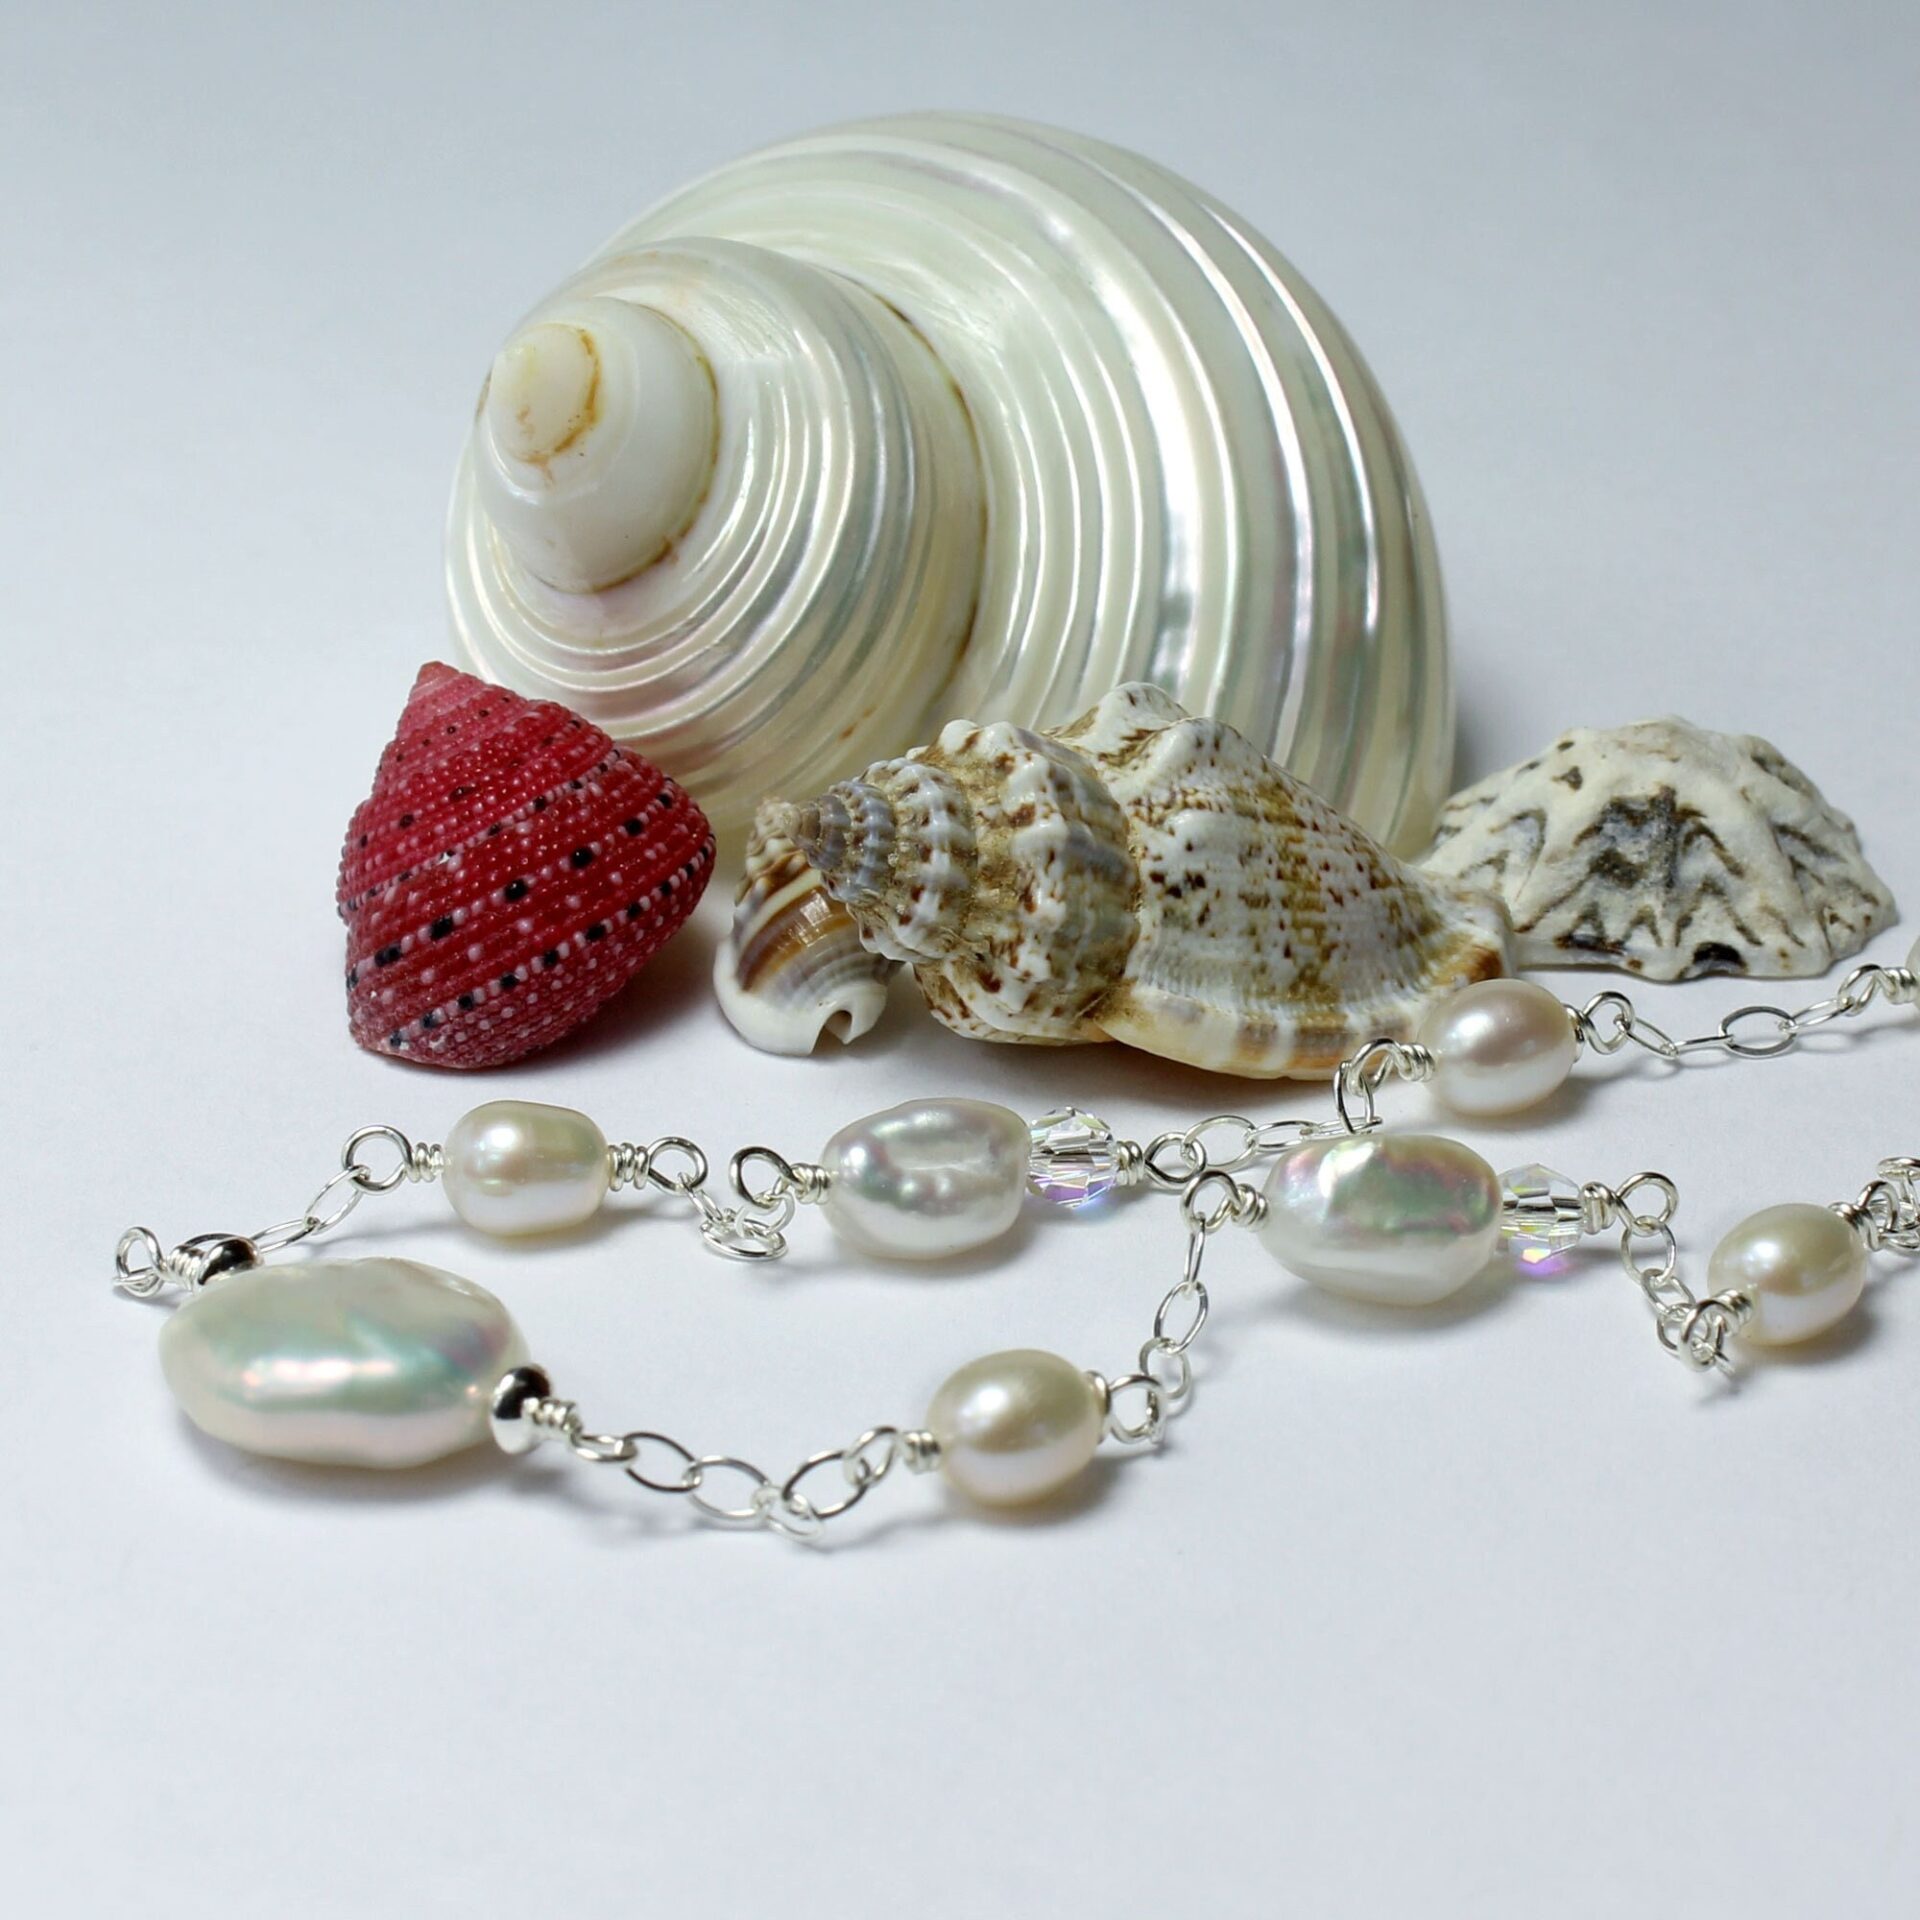 Coin Pearl and Oval Keshi Pearl Necklace